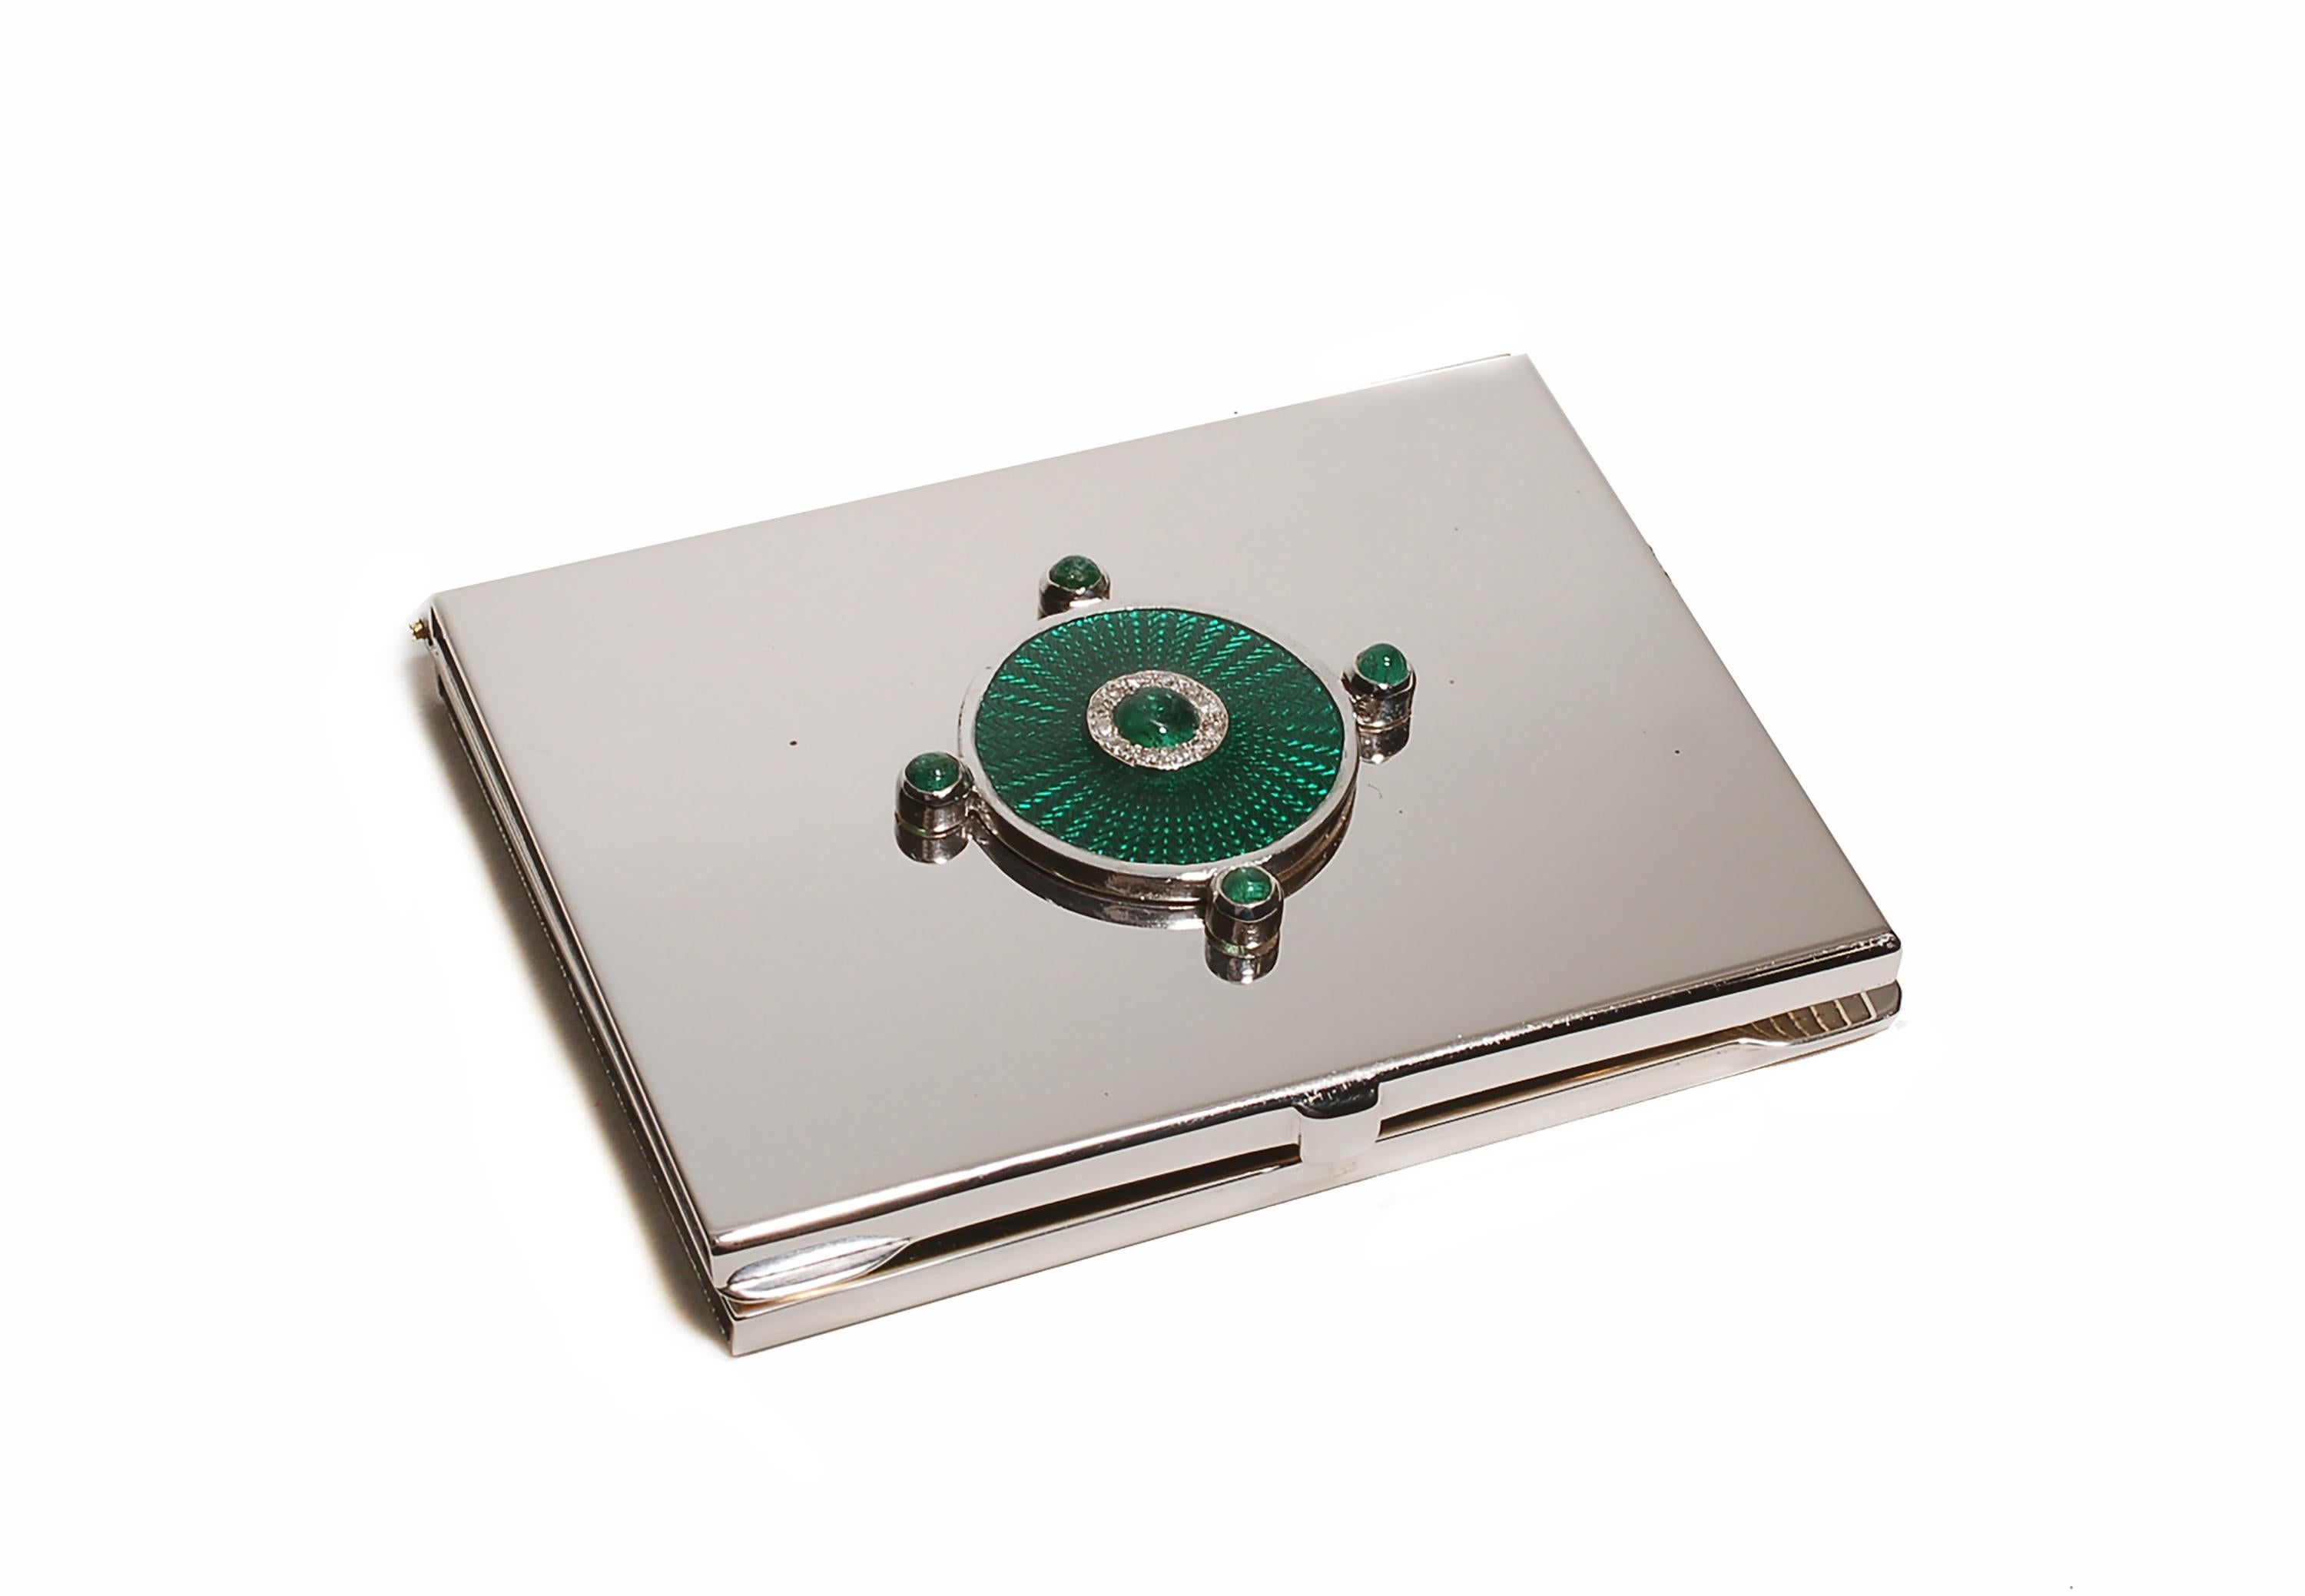 20th-century sterling silver Guilloché green enamel mirror case
One of a kind mirror case 
Cabochon emeralds weighing 0.65 carats
Diamonds weighing 0.15 carats
Handmade in Italy
White gold plated 
The Ocie Minaudiere collection was created to